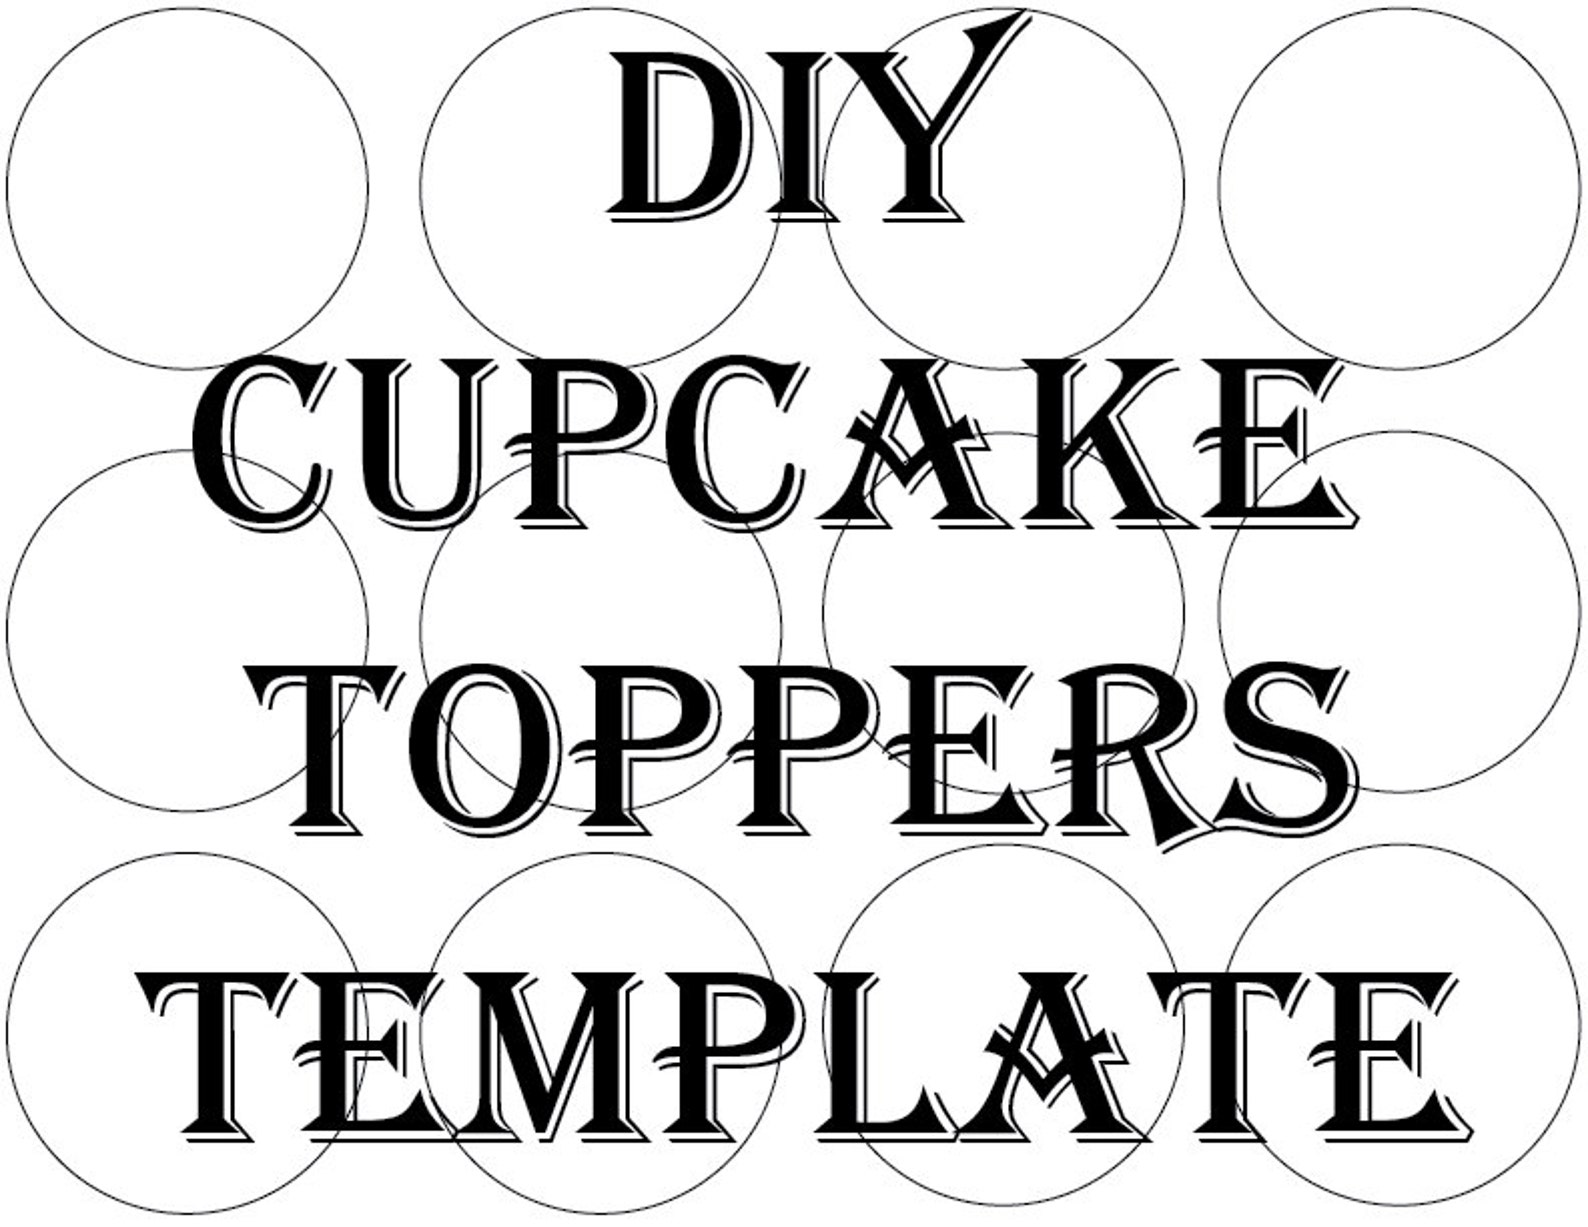 blank-cupcake-topper-template-free-richard-mcnary-s-coloring-pages